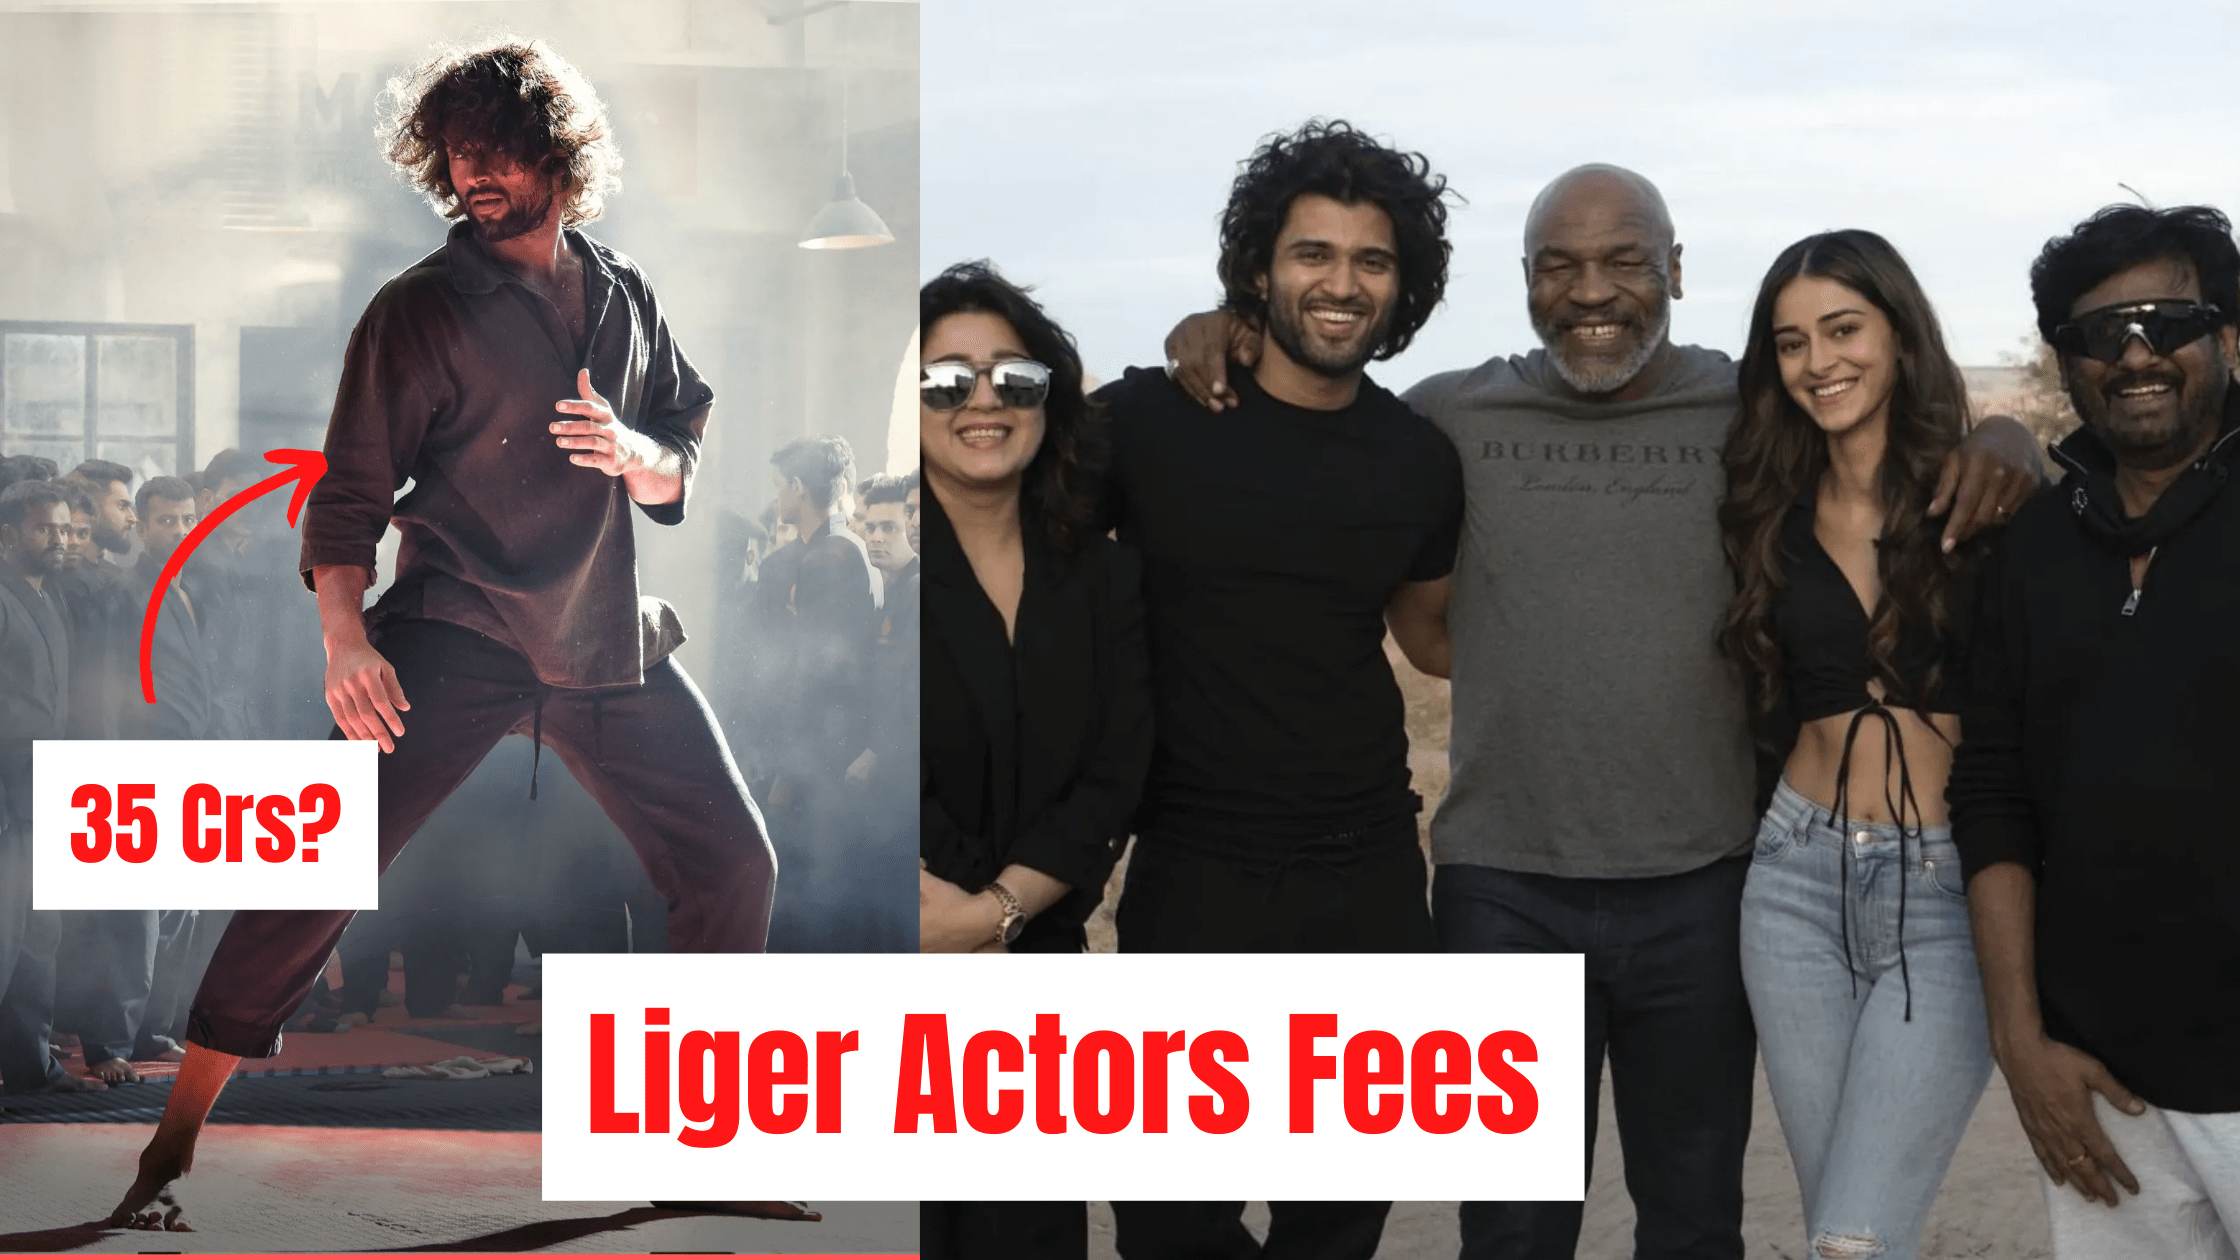 Liger Actors Fees: Check Out How Much Liger Actors Have Charged For The Film!